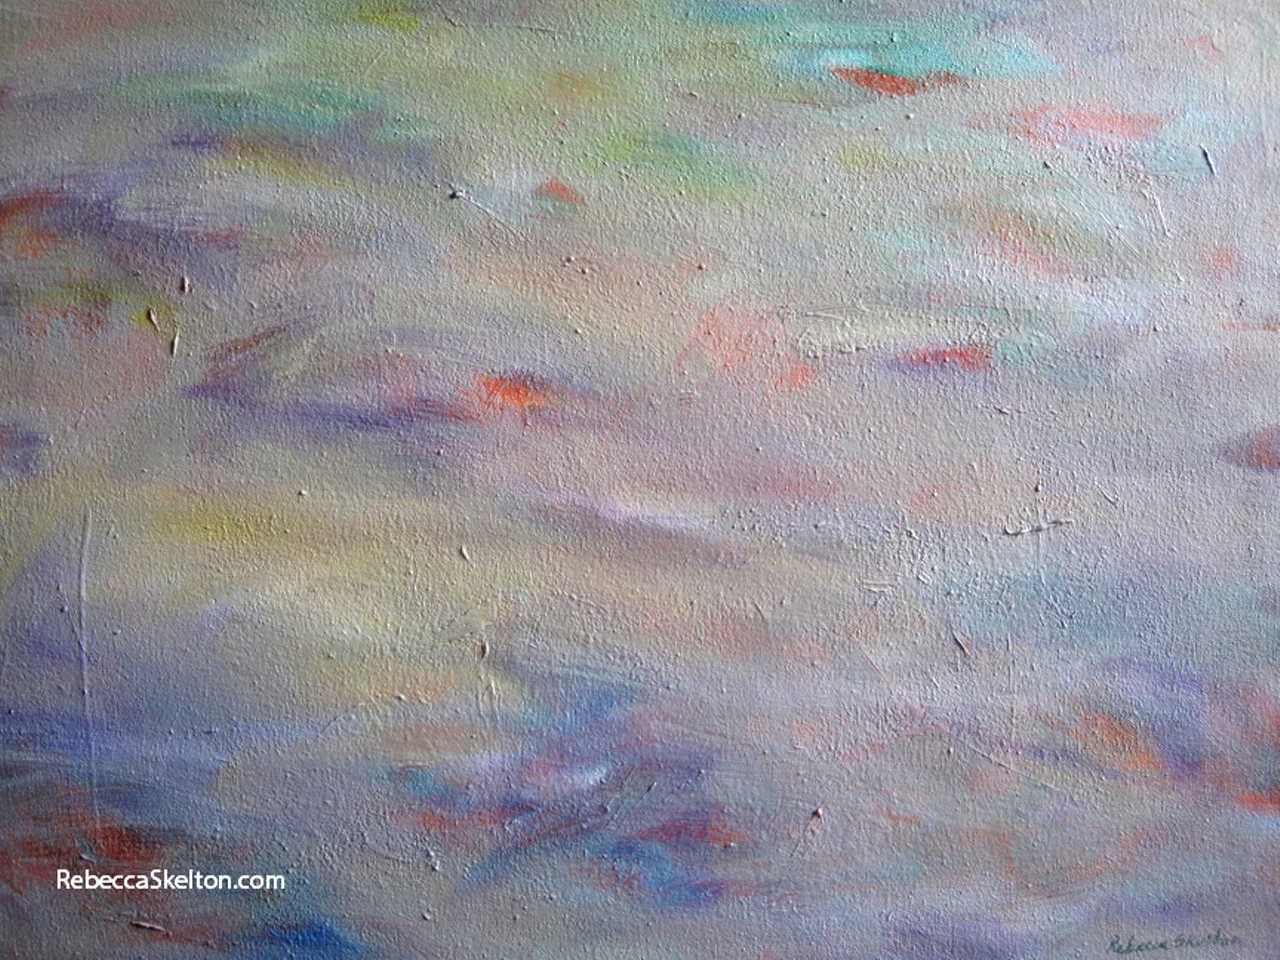 Summer Dusk by Rebecca Skelton
"I begin my artwork as an experiment with a particular set of colors. The goal is to see what sort of expression I can get from various combinations of colors and marks, and to see how minimal the work can be before it becomes background. I consider abstraction to be the most difficult and the pinnacle of visual language."&#151;Rebecca Skelton
Image courtesy of Rebecca Skelton